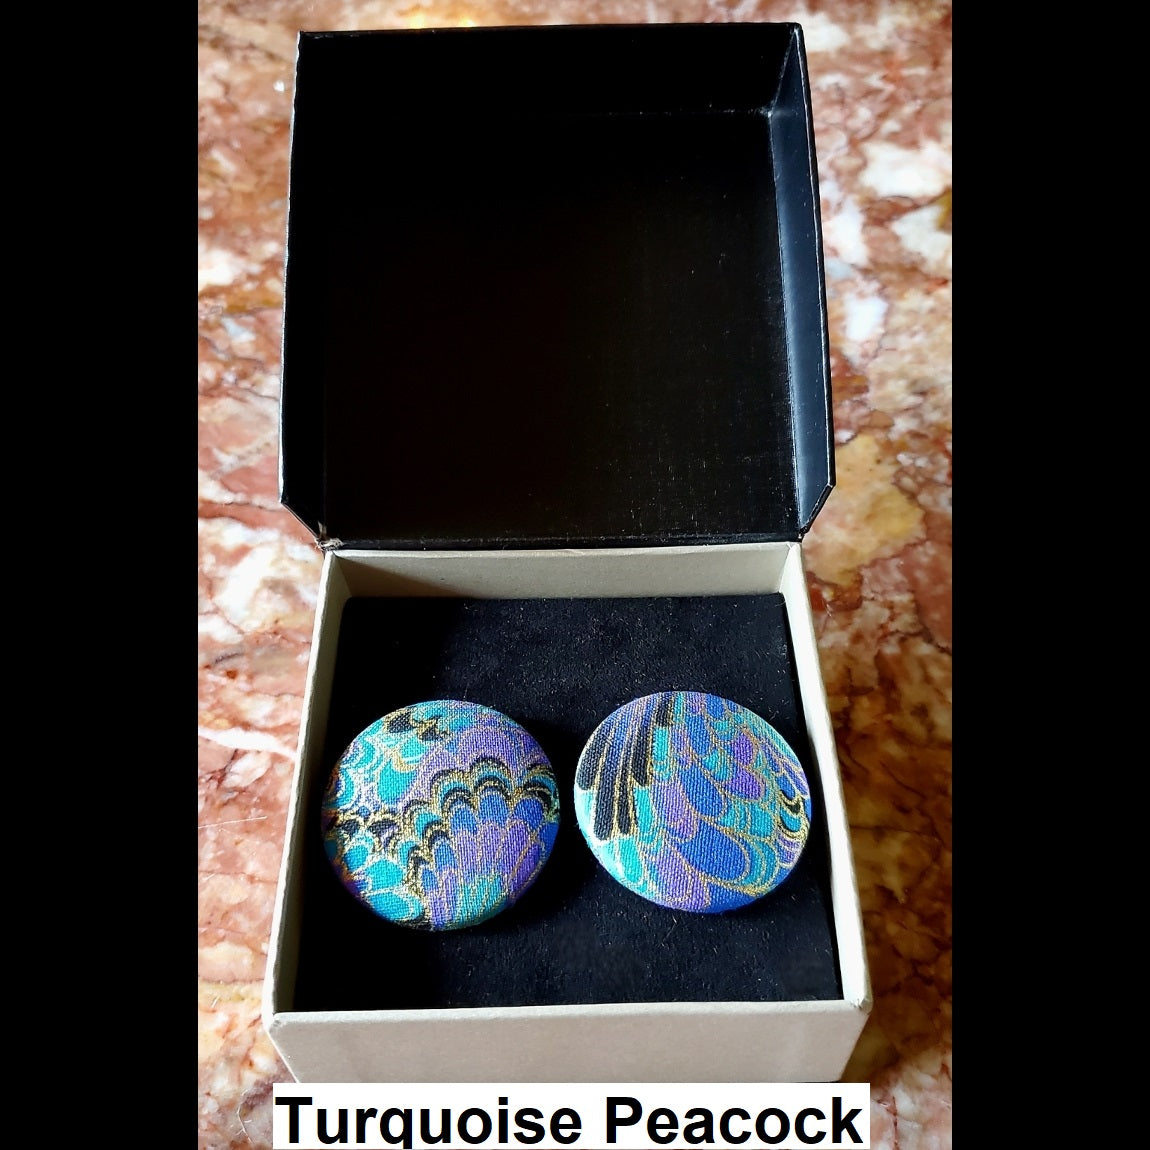 Turquoise and purple swirl print button earrings in jewelry box